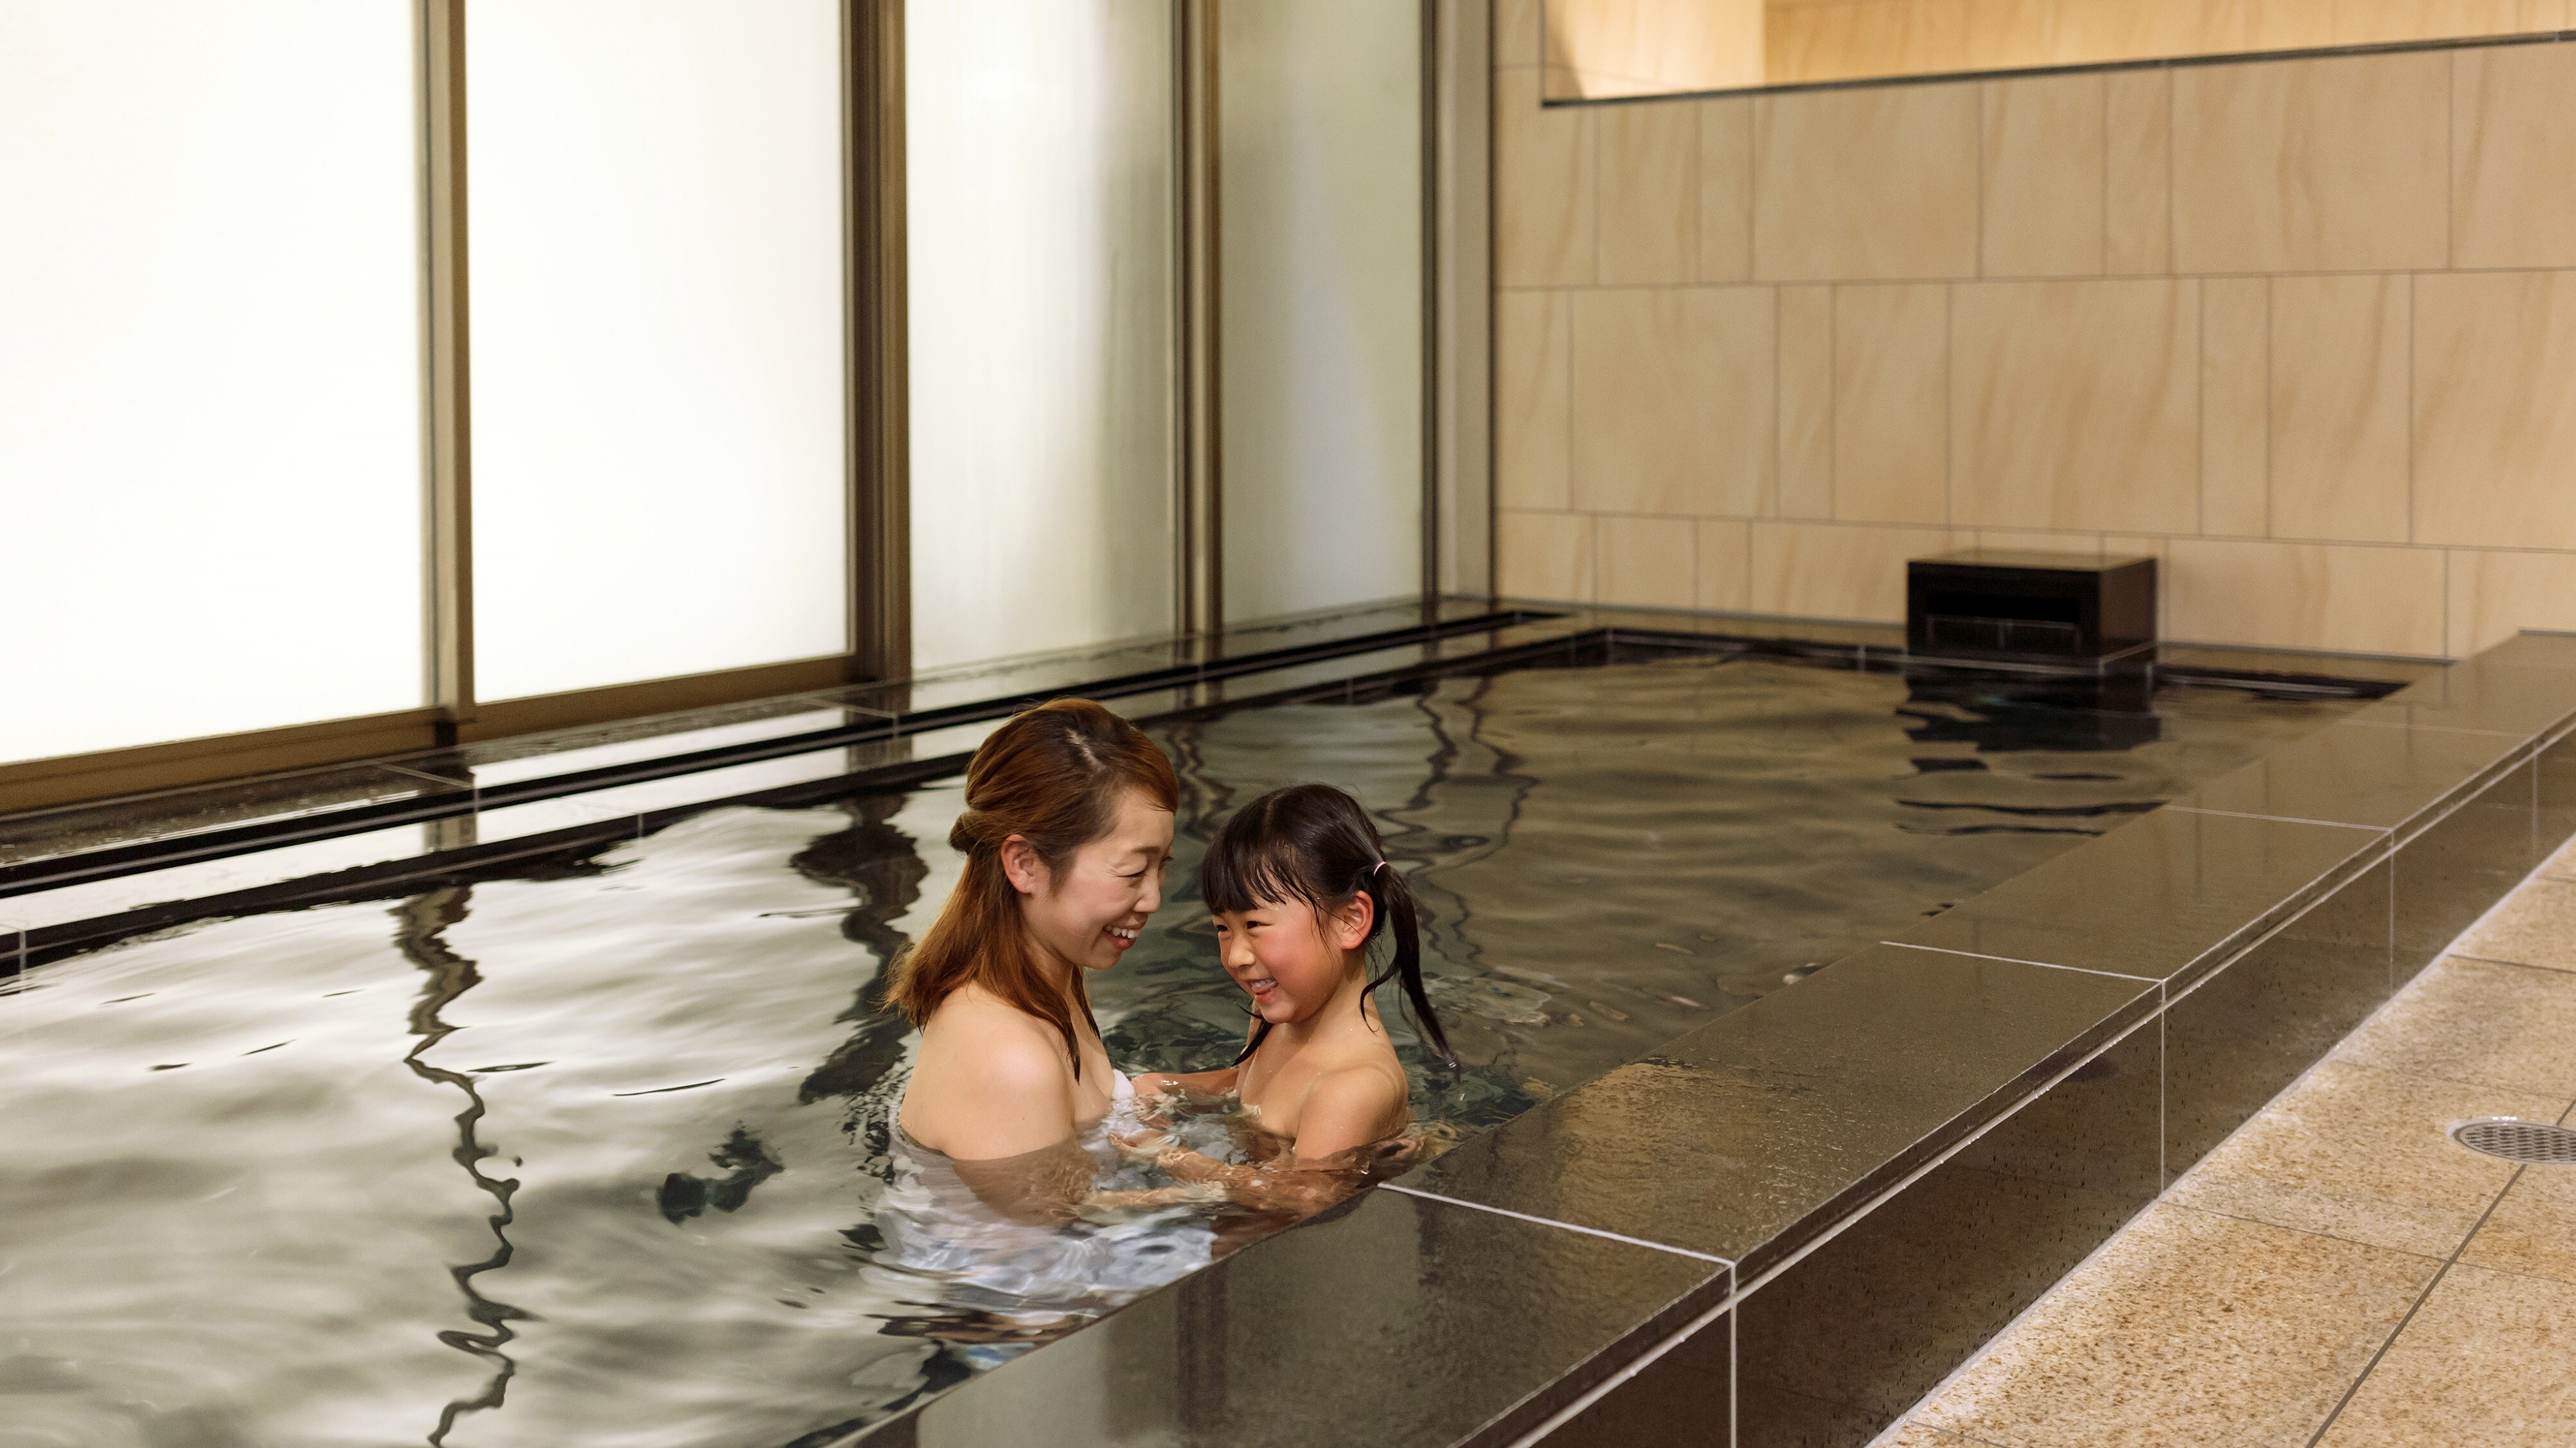 ■ Large communal bath exclusively for guests ■ Free large communal baths for men and women are available. Business hours 15: 00-25: 00, 6: 00-9: 00